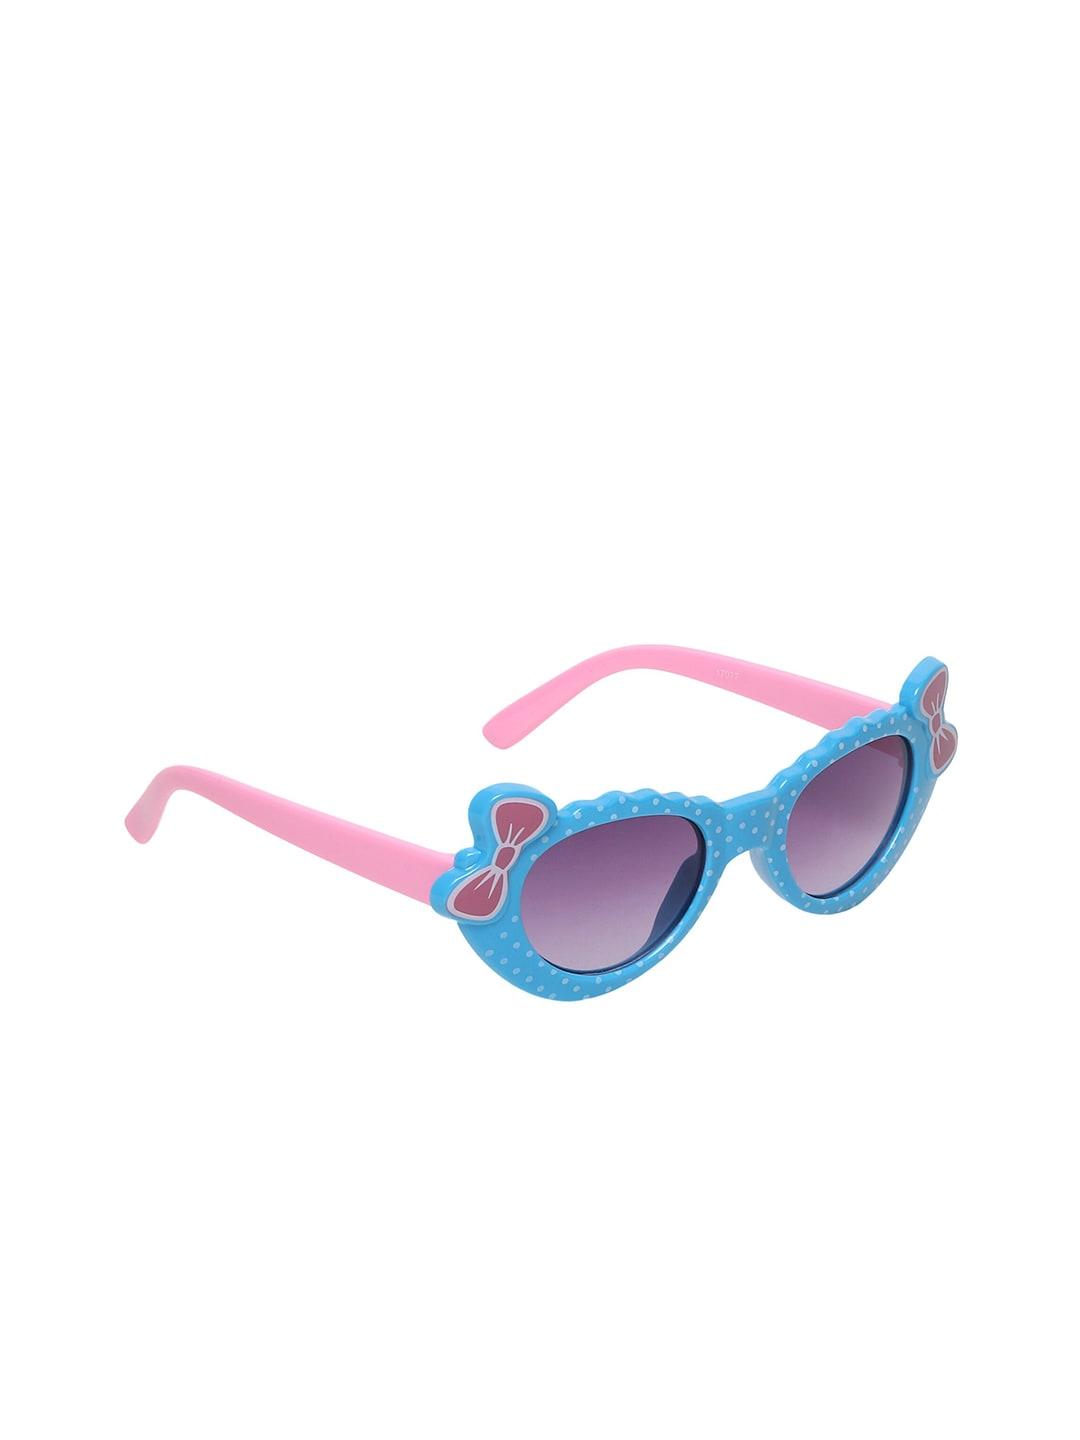 criba unisex grey lens & blue sunglasses with uv protected lens cr_baby blu-pink-blue